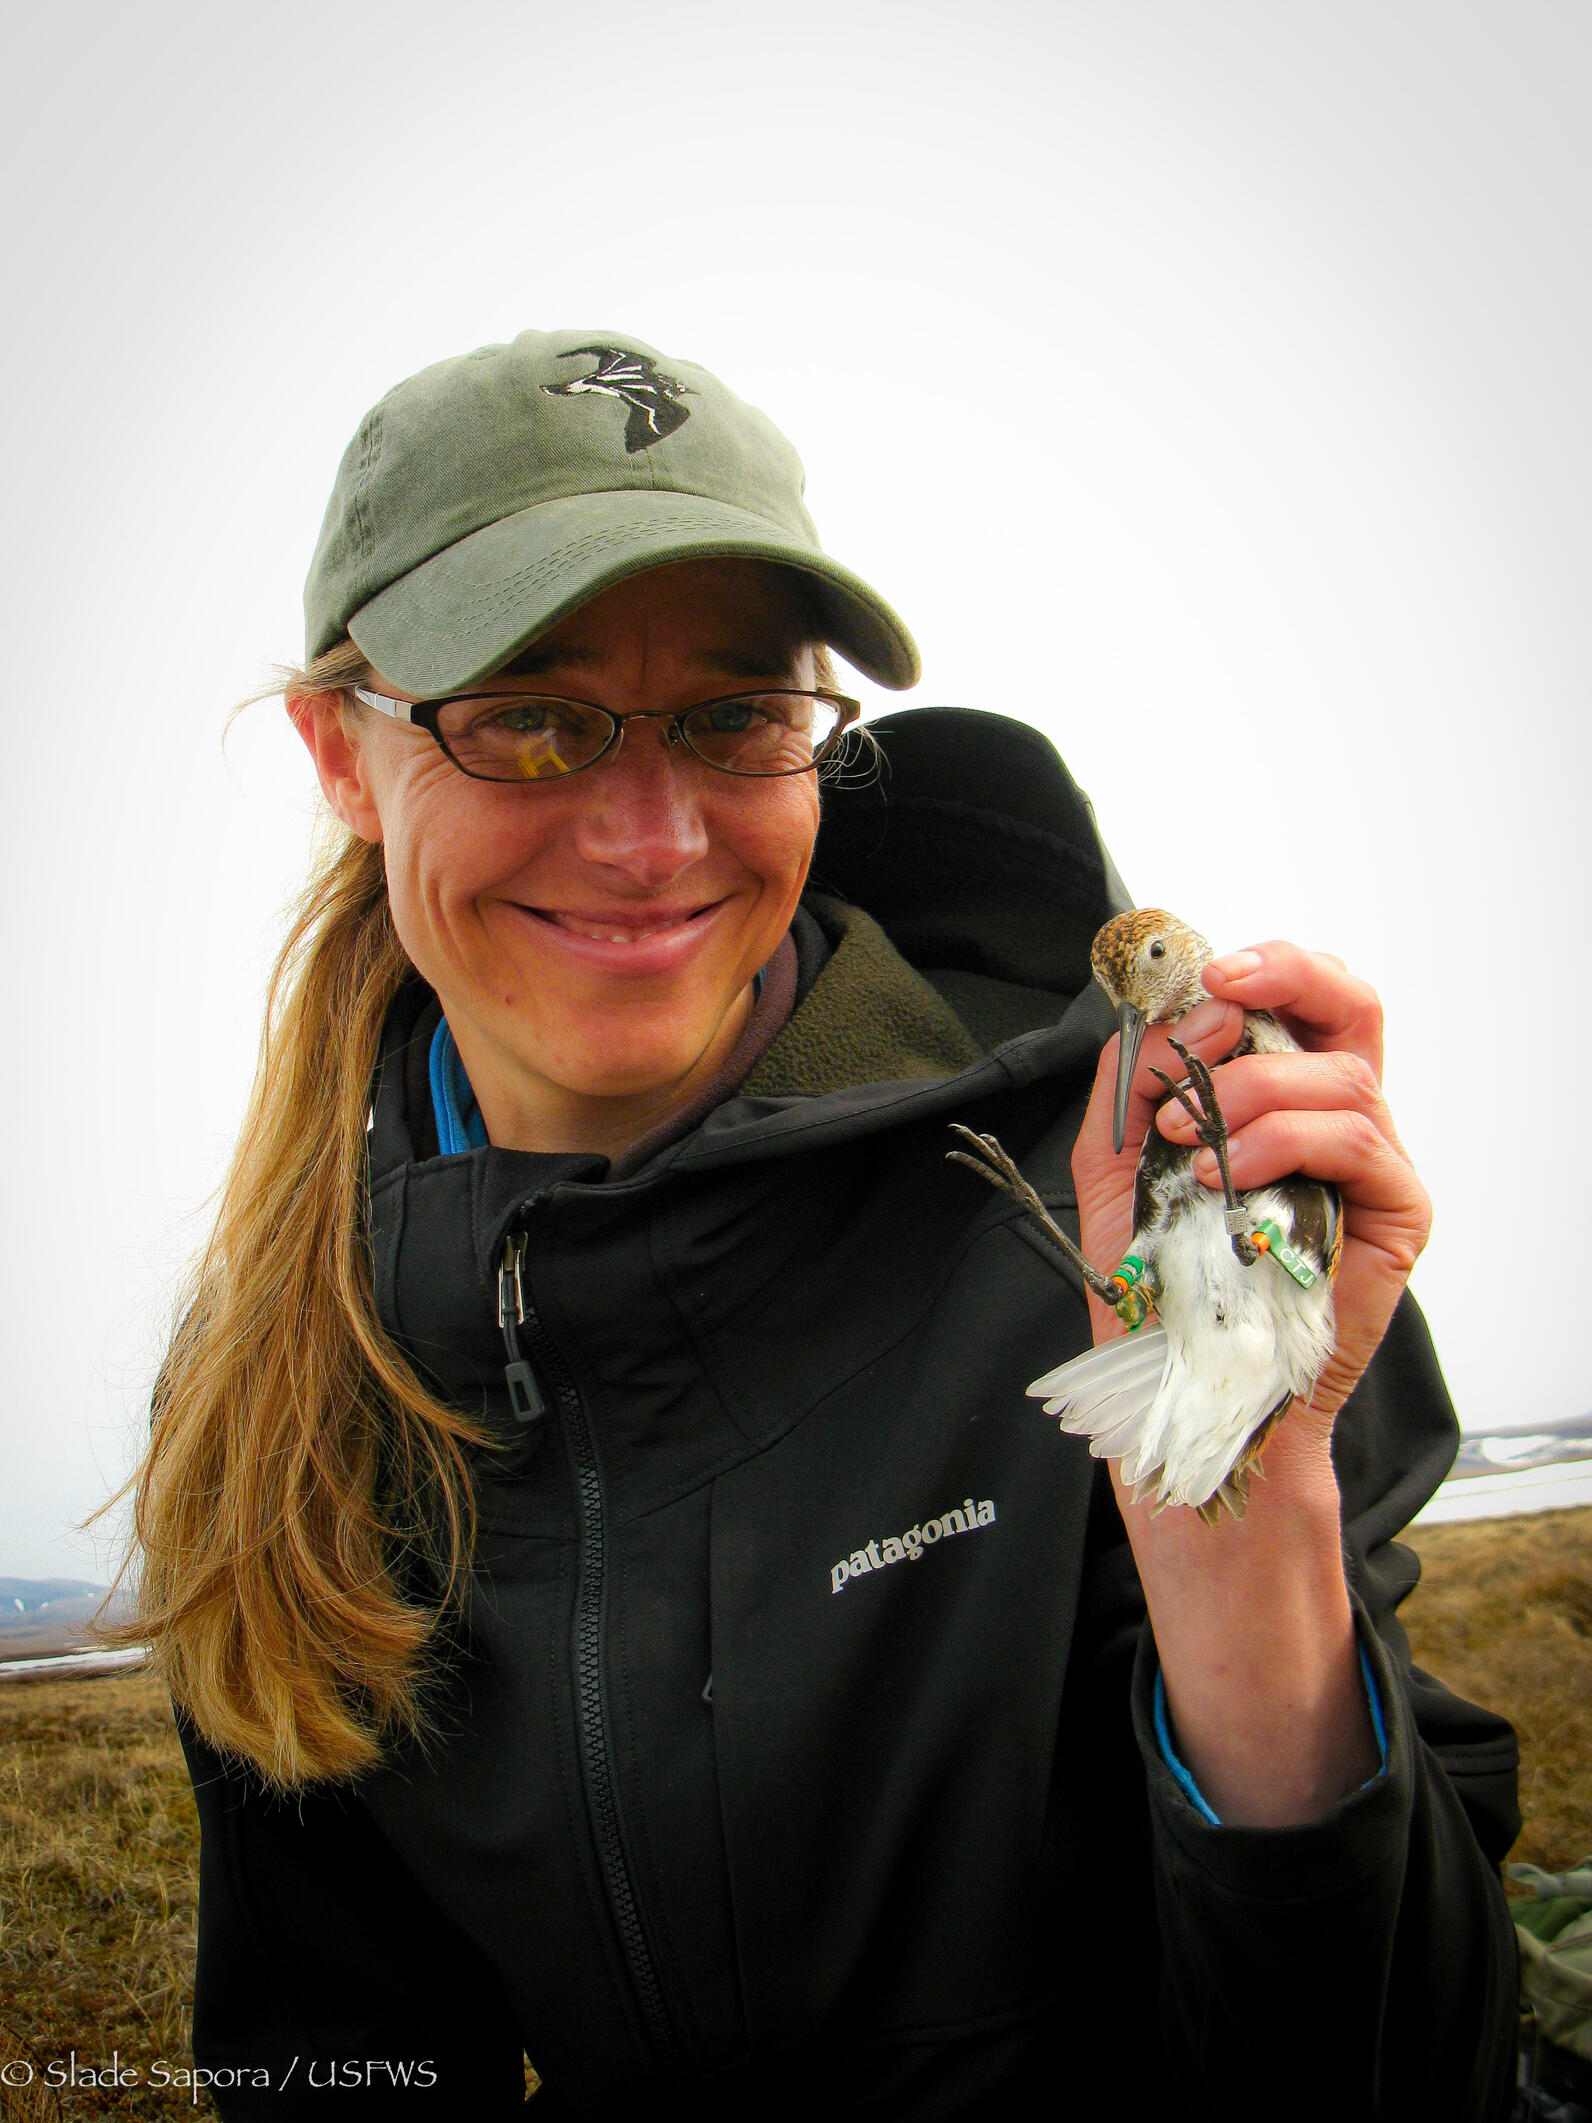 Woman in hat holding shorebird and smiling at the camera